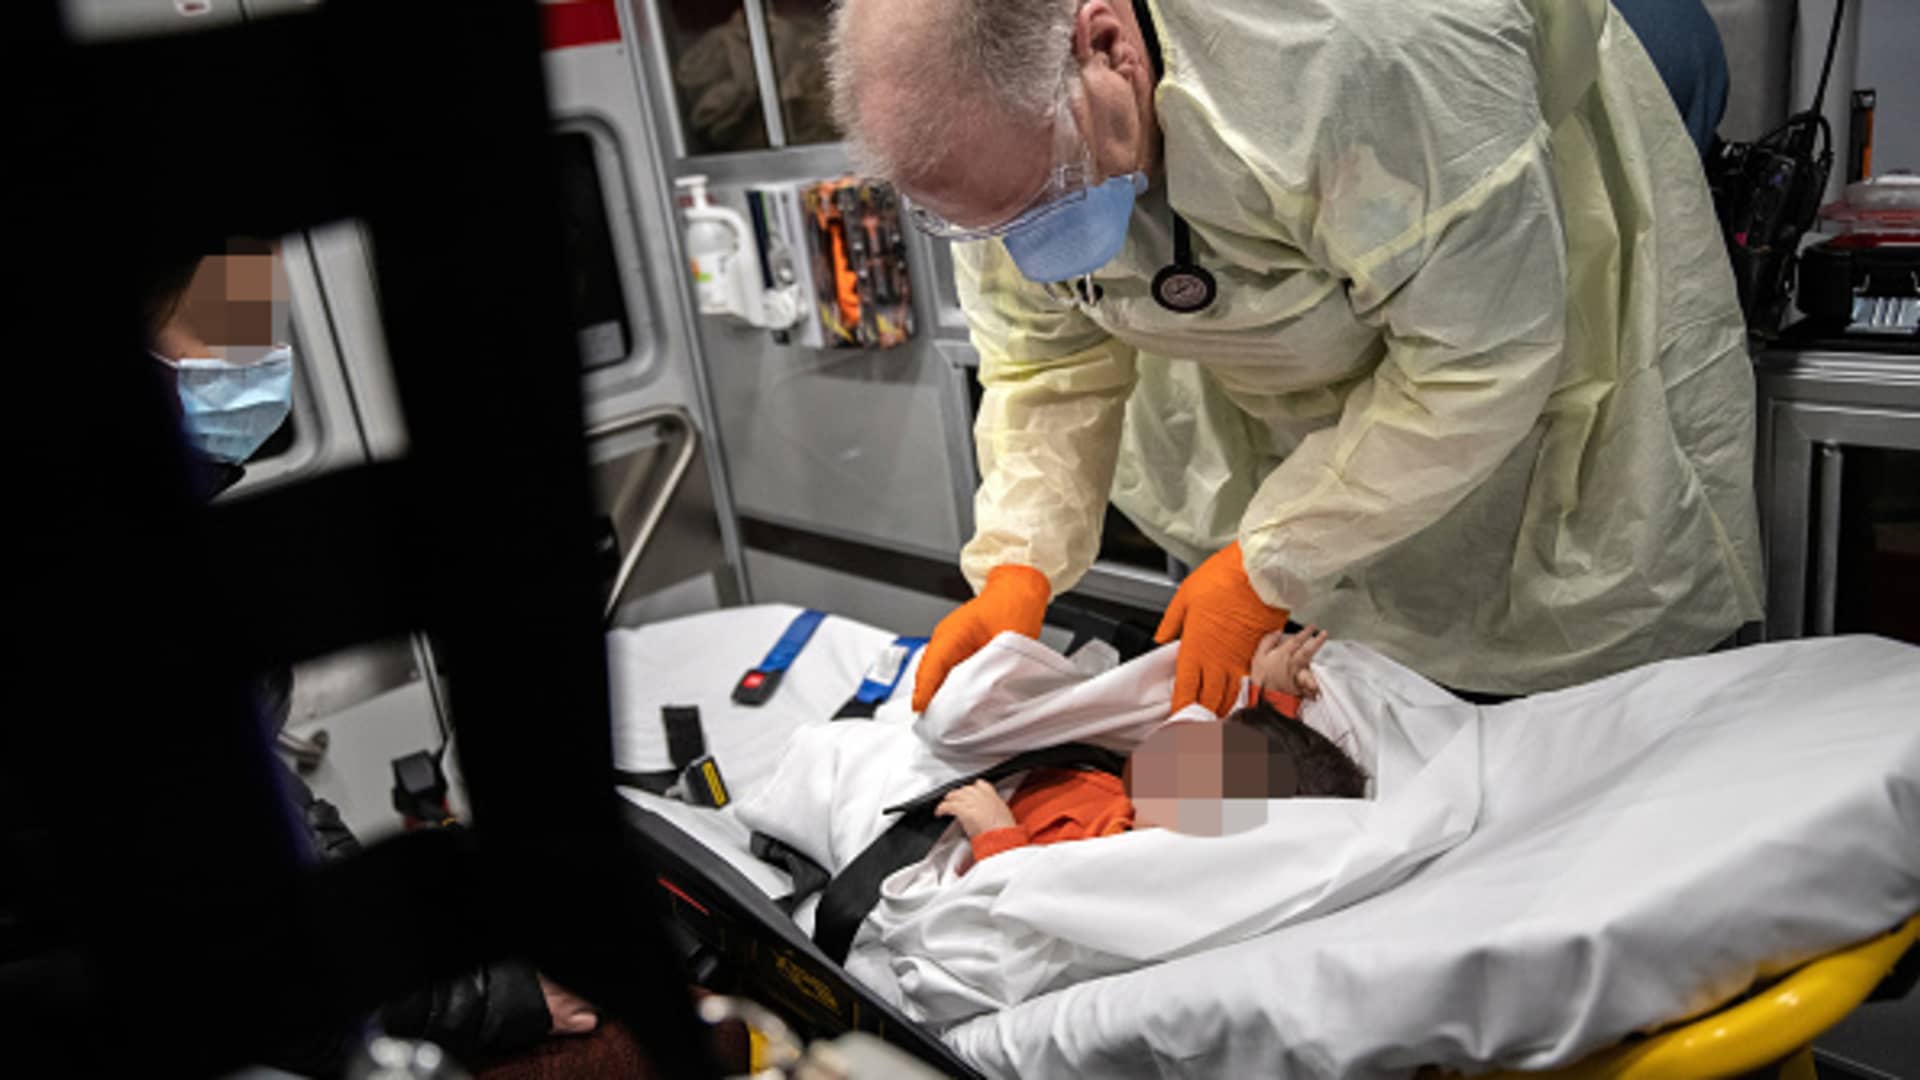 A paramedic wearing personal protection equipment (PPE), tends to a 10-month-old boy with fever while riding by ambulance with the infant's mother to Stamford Hospital on April 04, 2020 in Stamford, Connecticut.